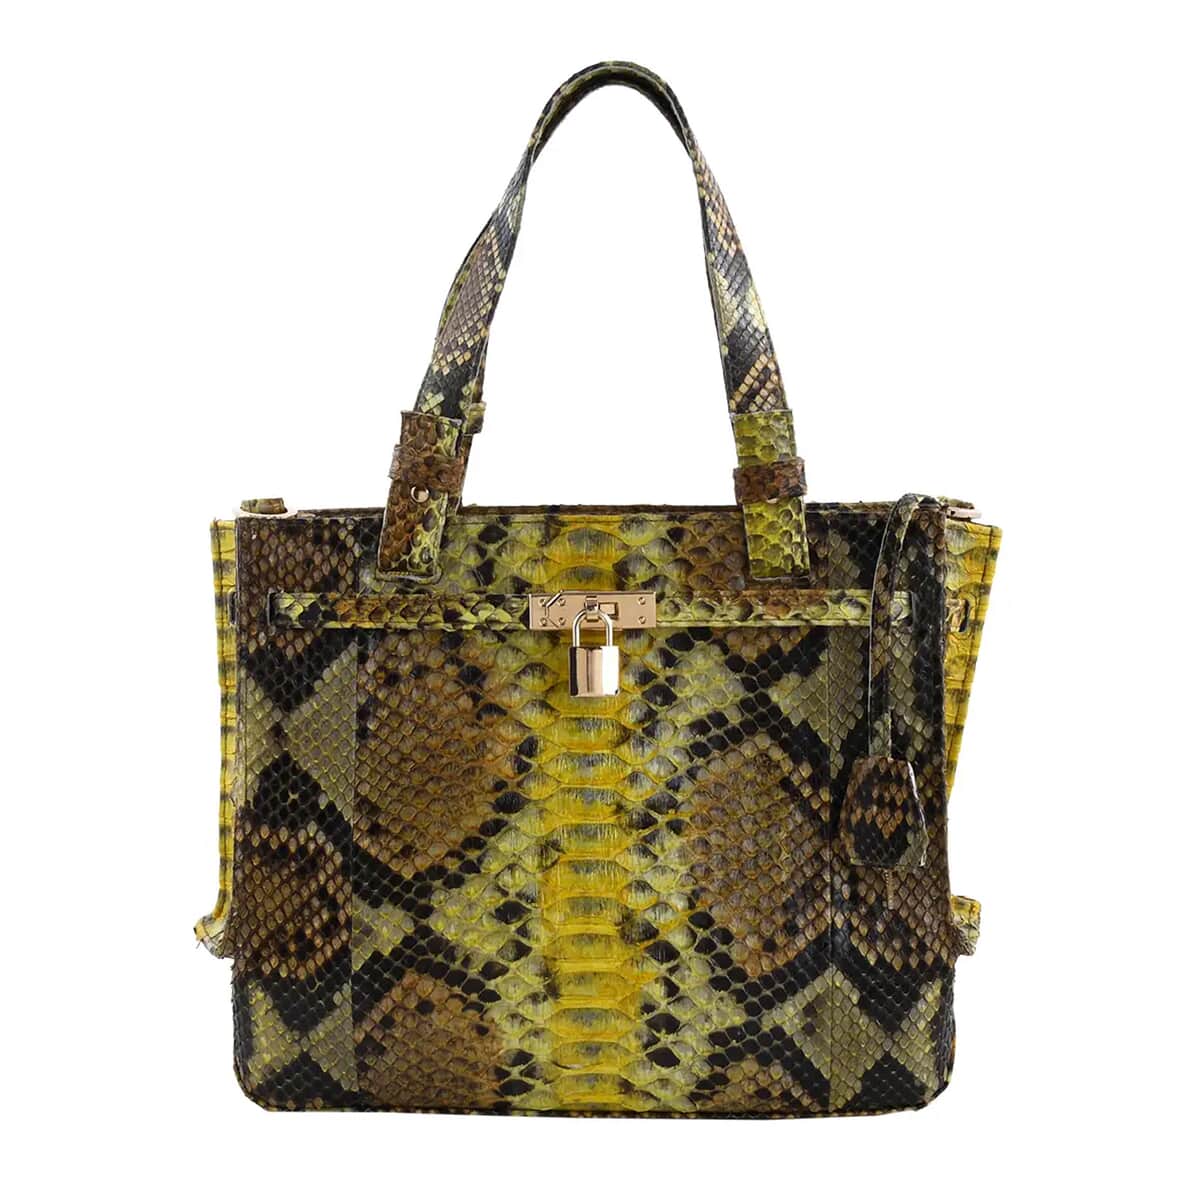 The Pelle Python Collection Handmade 100% Genuine Python Leather Yellow & Brown Tote Bag (12"x10"x4.5") image number 0